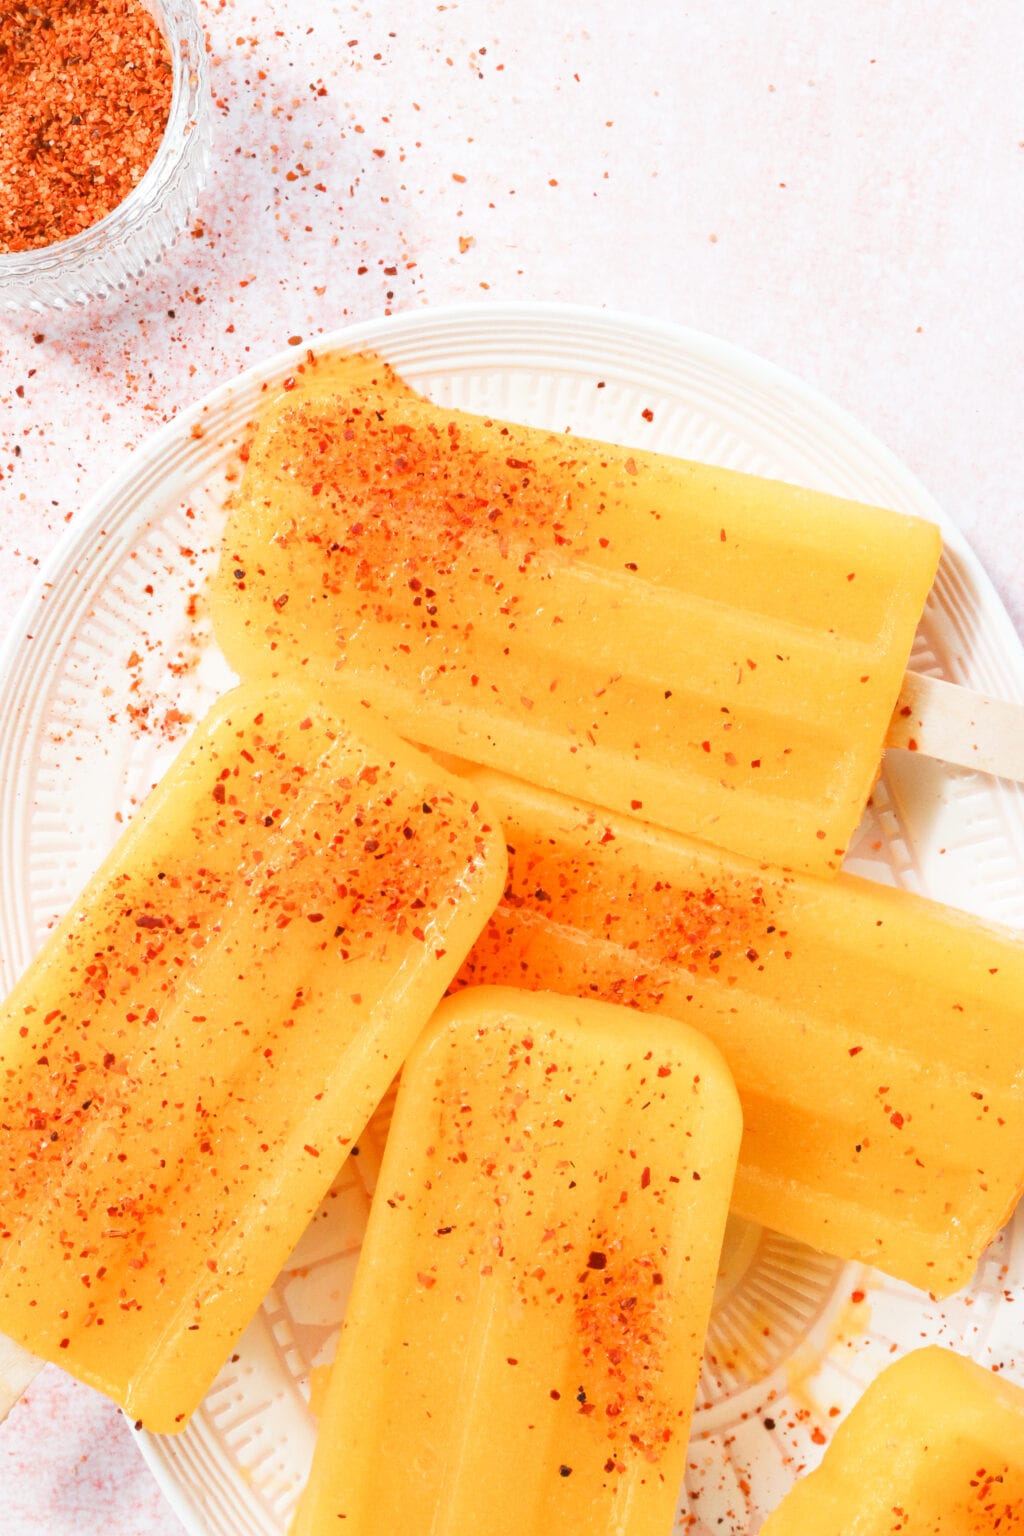 4 orange yellow coloured popsicles are on a pink and white oval plate. The popsicles are sprinkled with tajin seasoning.